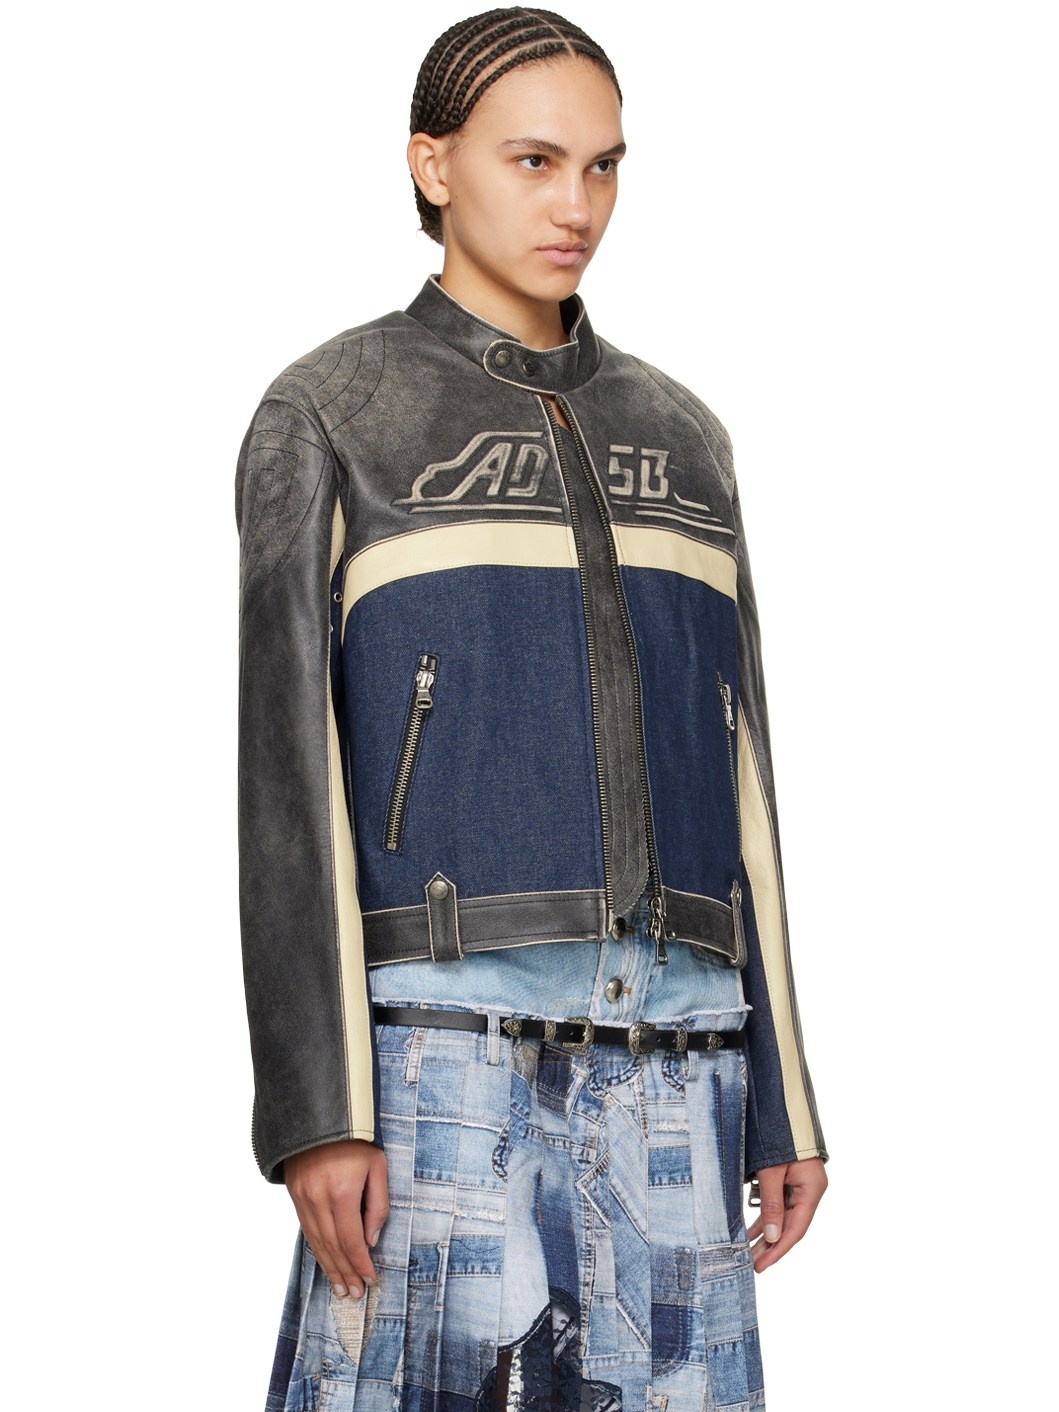 Gray & Blue Racing Leather Jacket - 2